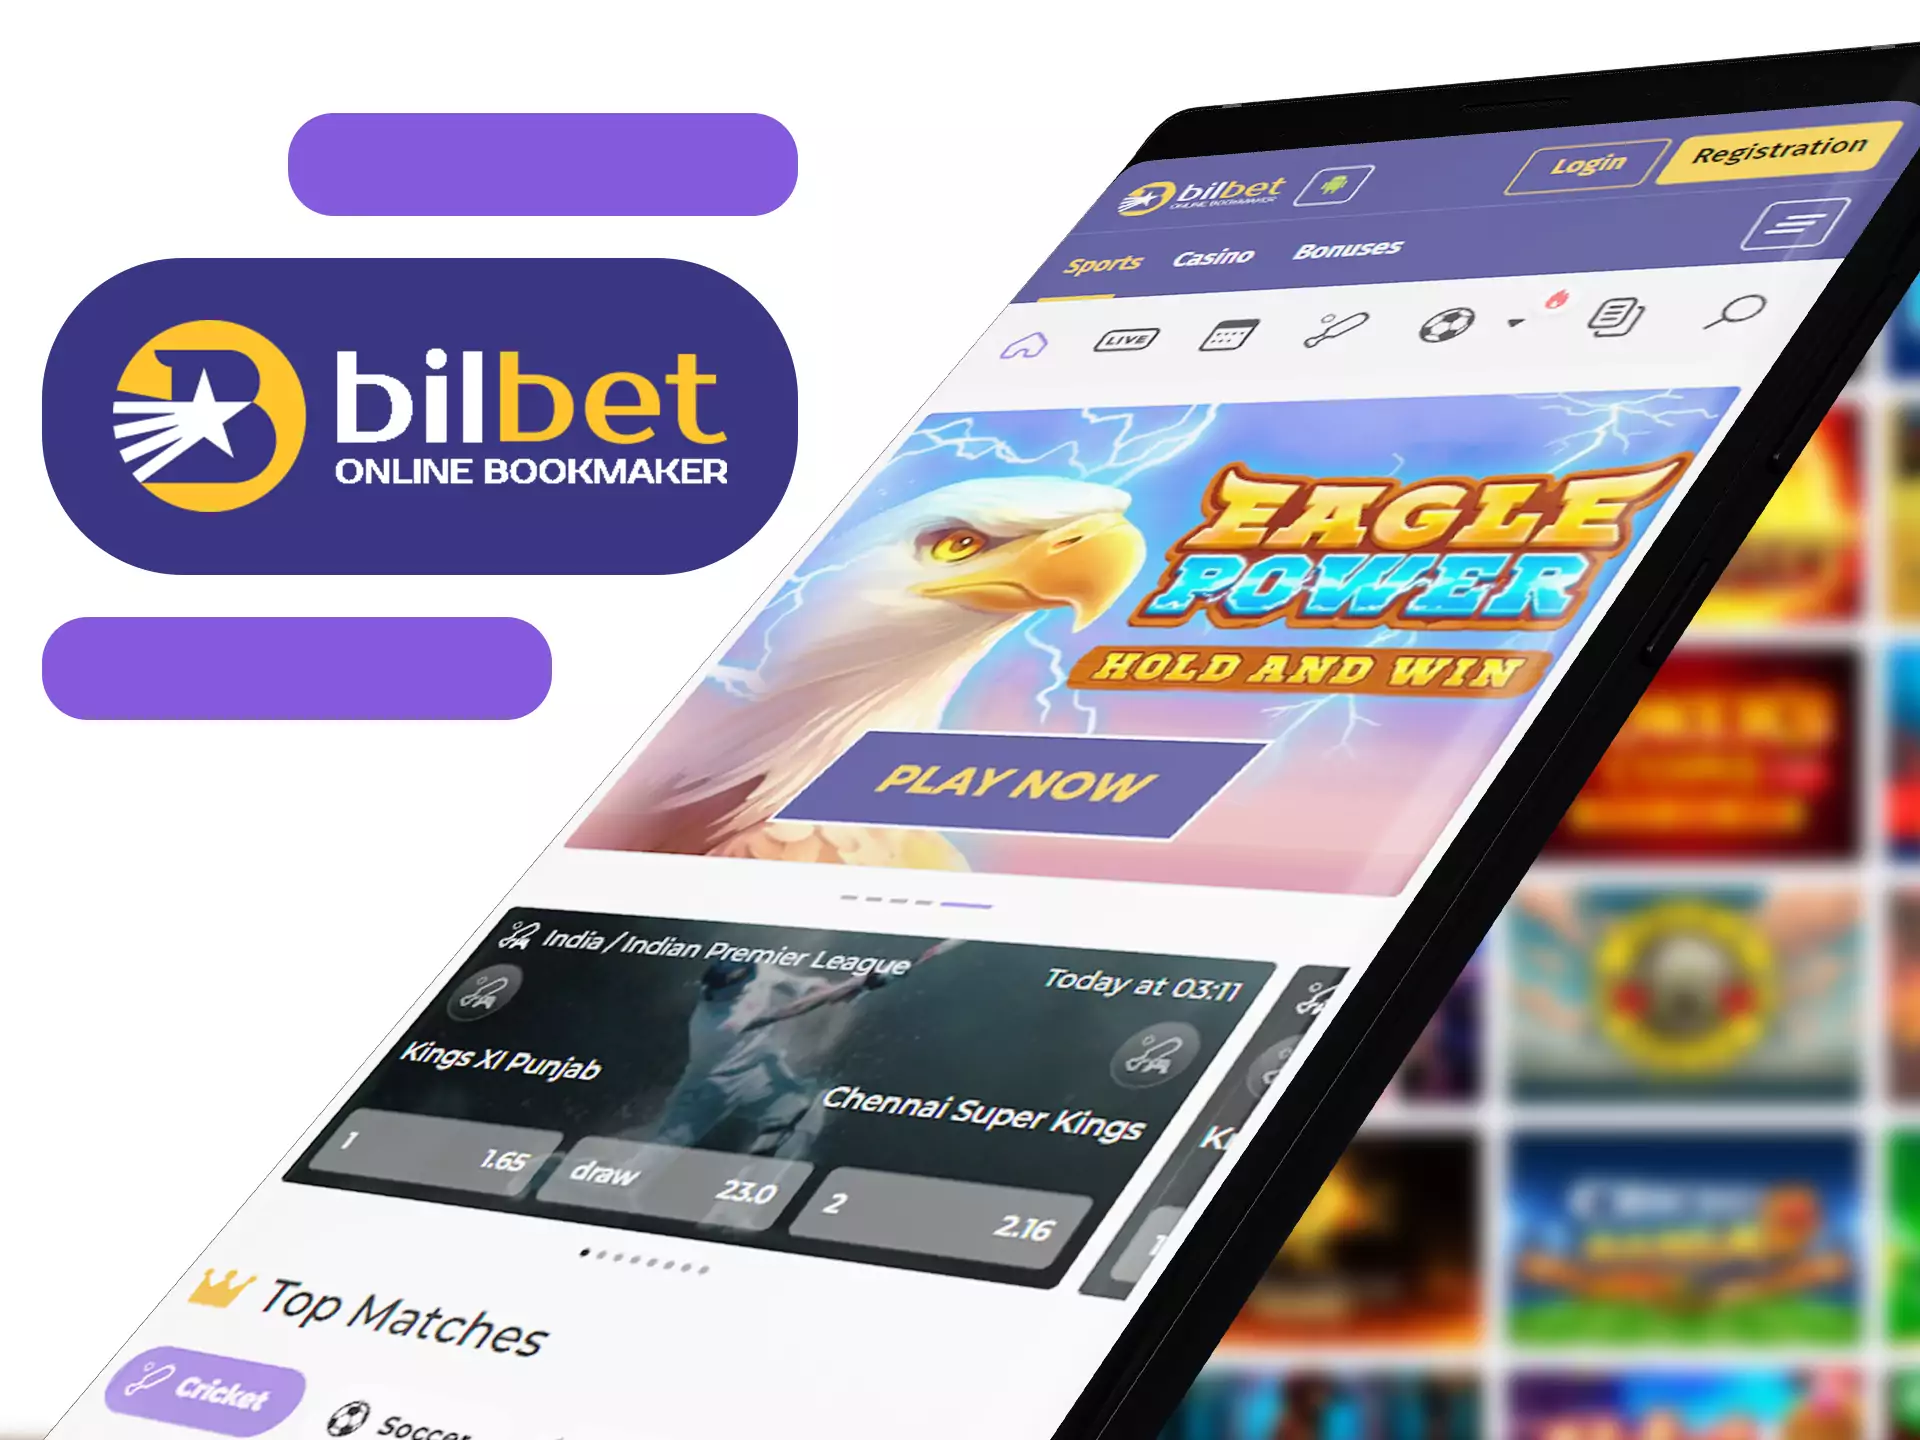 Read our review of Bilbet website.